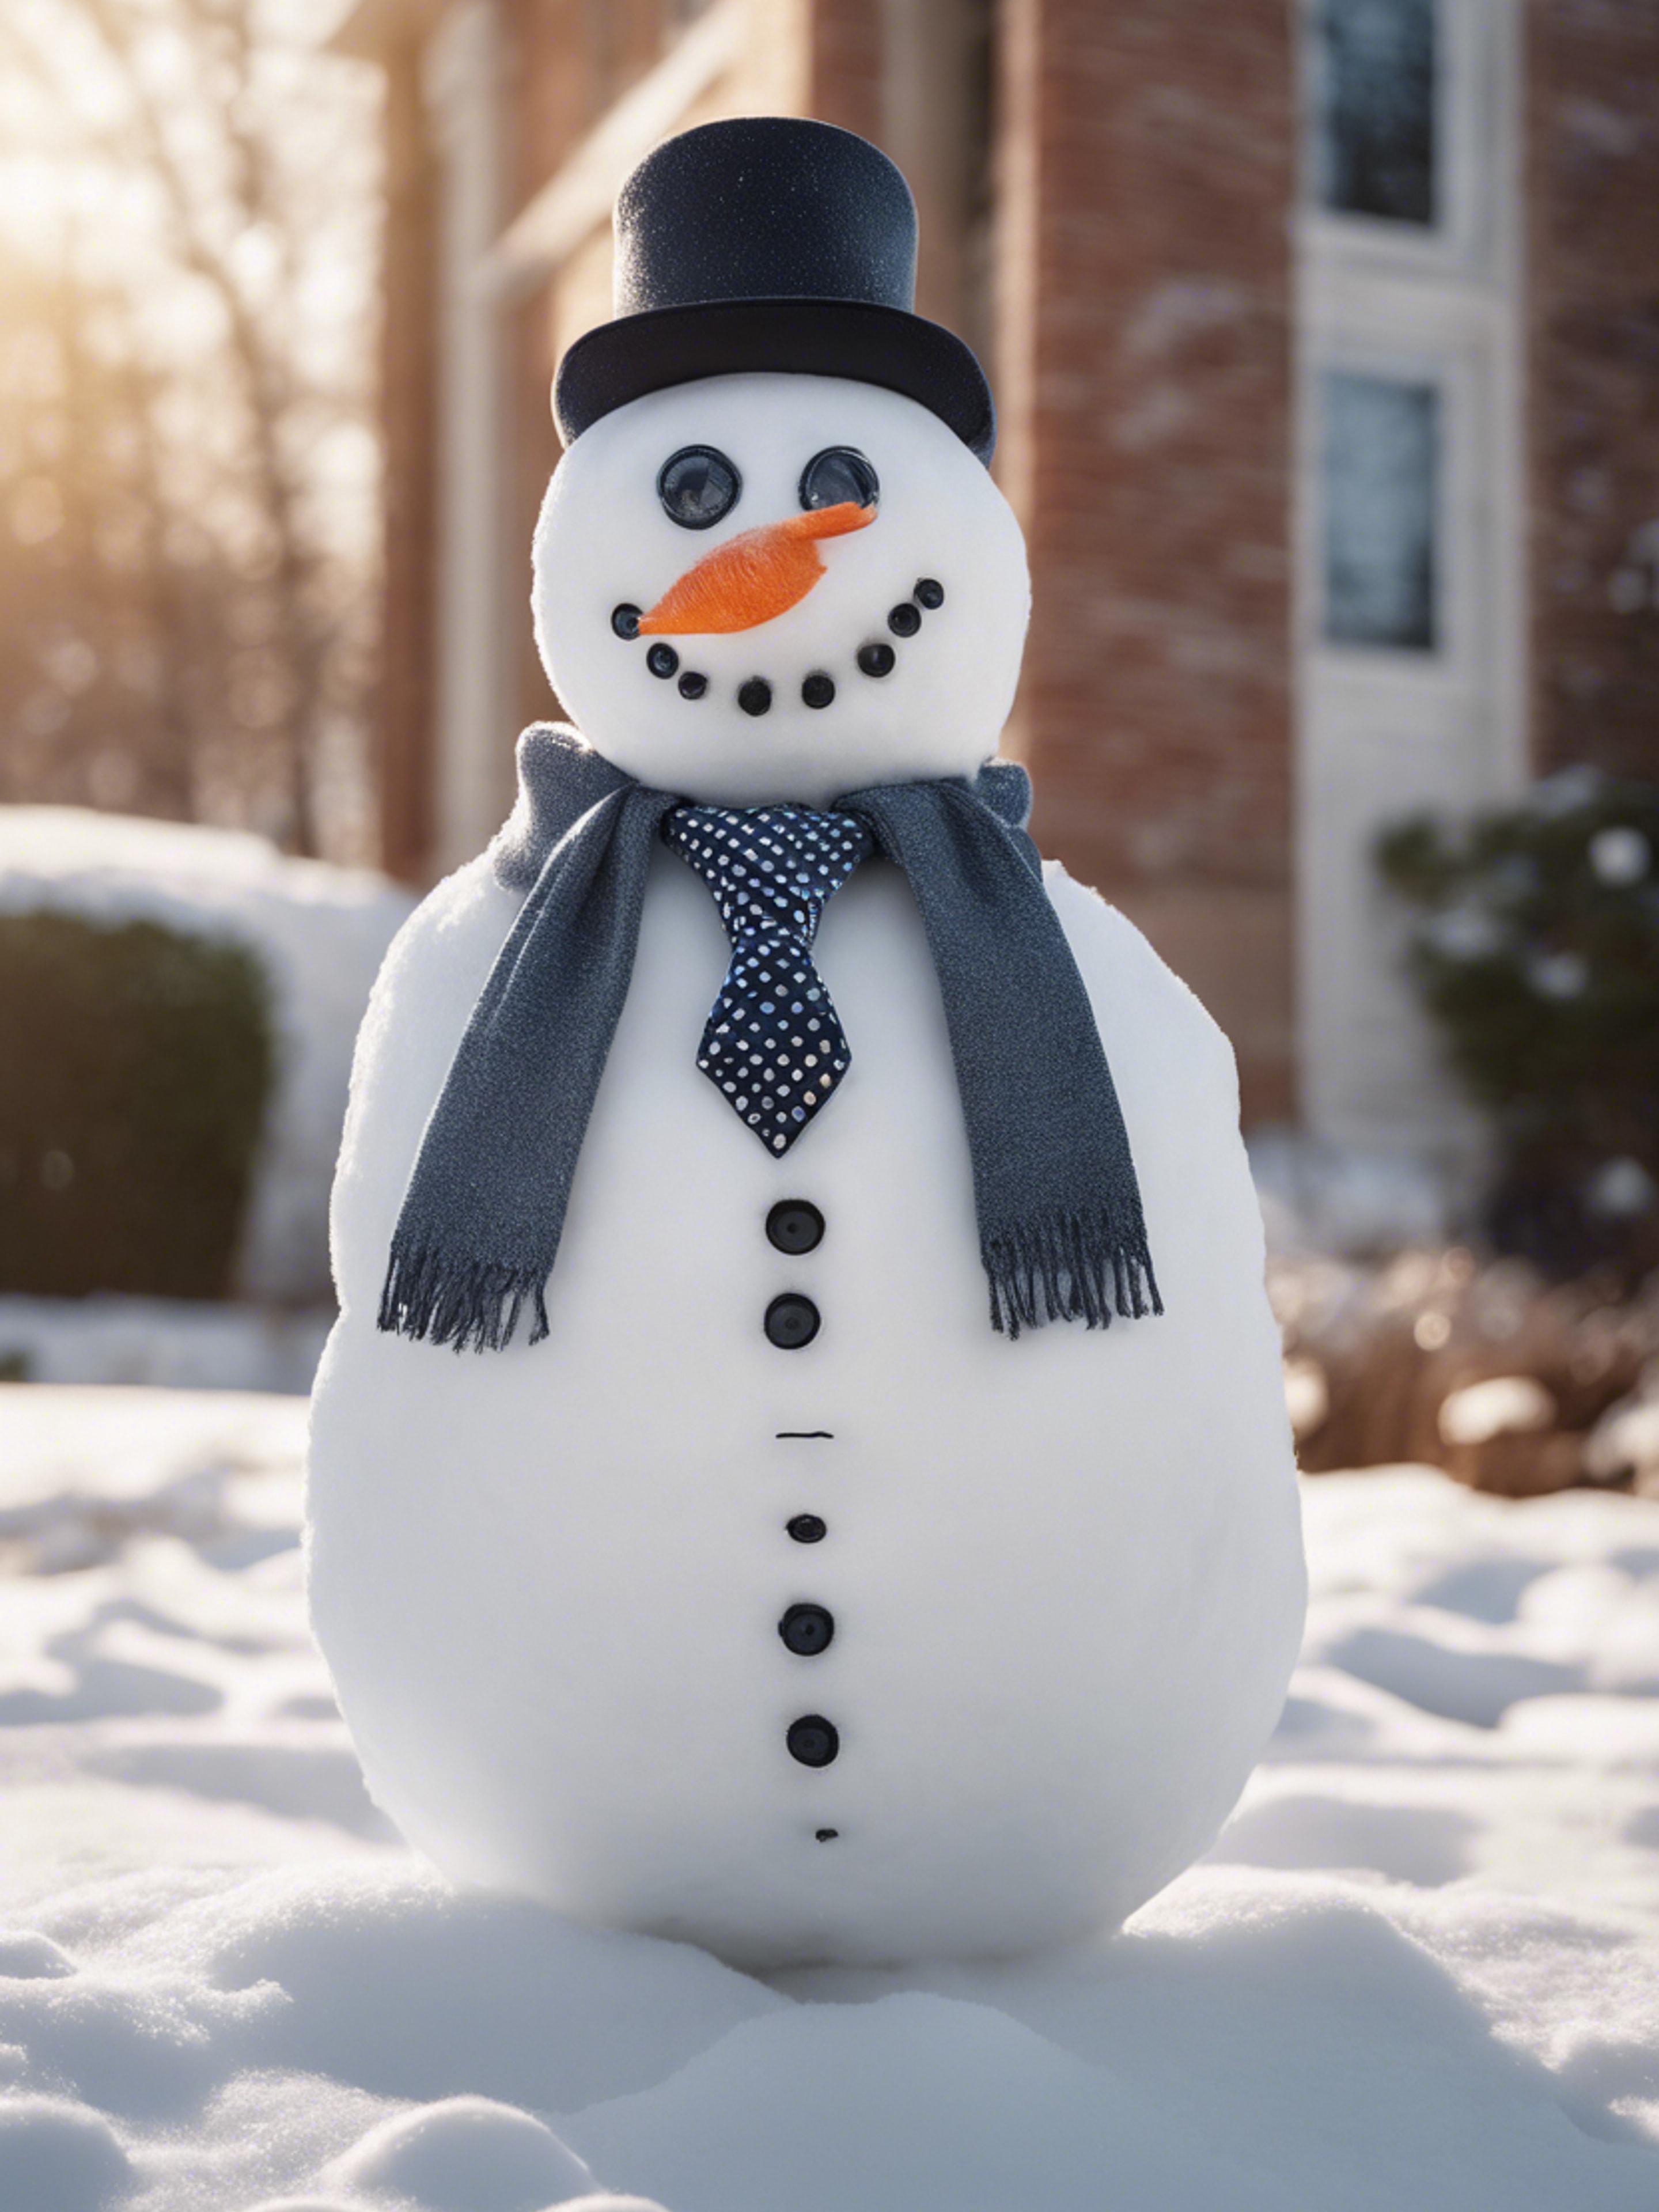 A sharply-dressed snowman wearing glasses and a tie, standing stylishly in the front yard. Wallpaper[8fe377dbcf114a30953b]